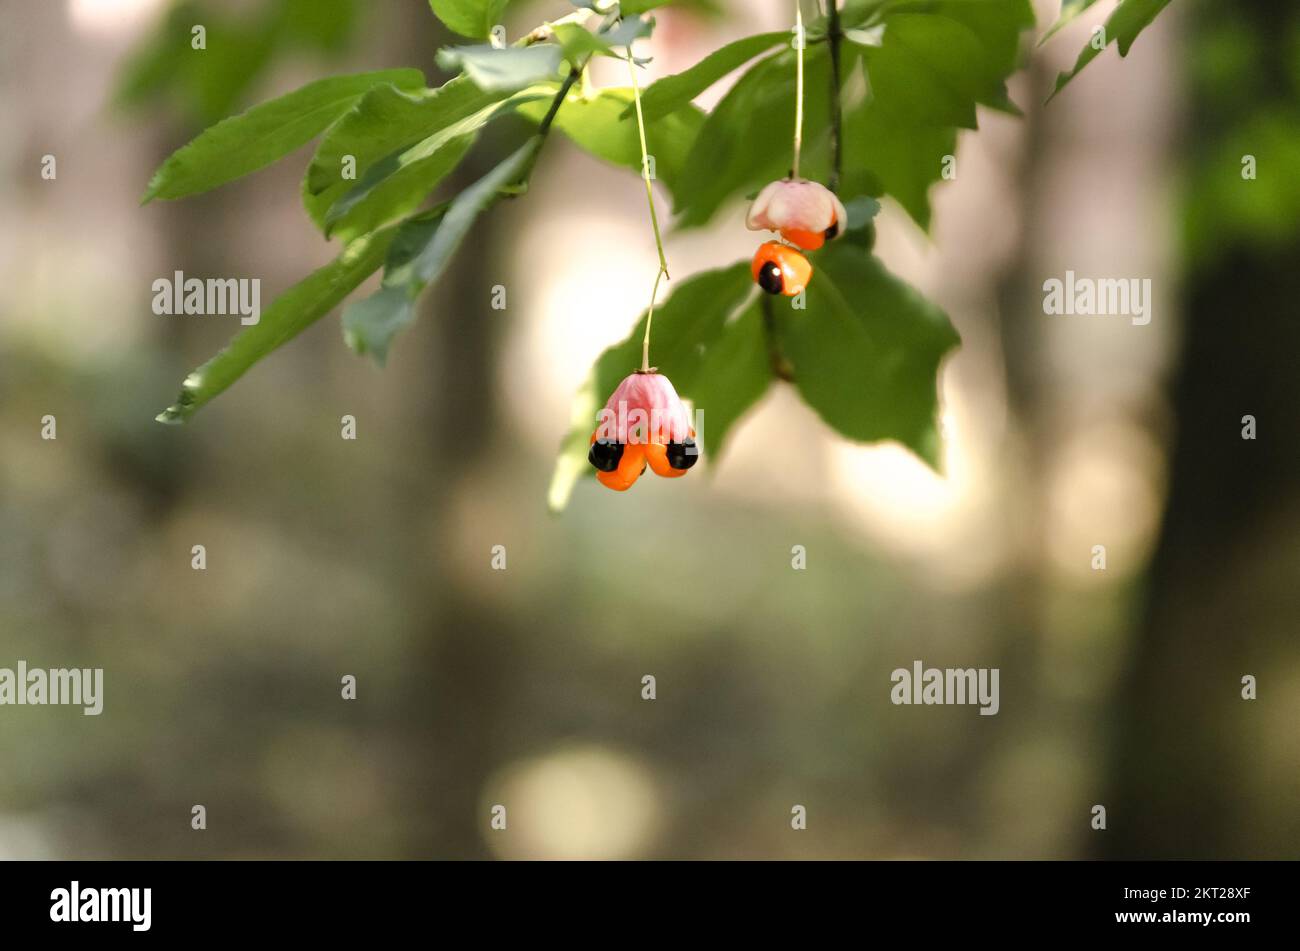 They See You. Euonymus Verrucosus Fruit in Natural Environment Берескле́т Stock Photo